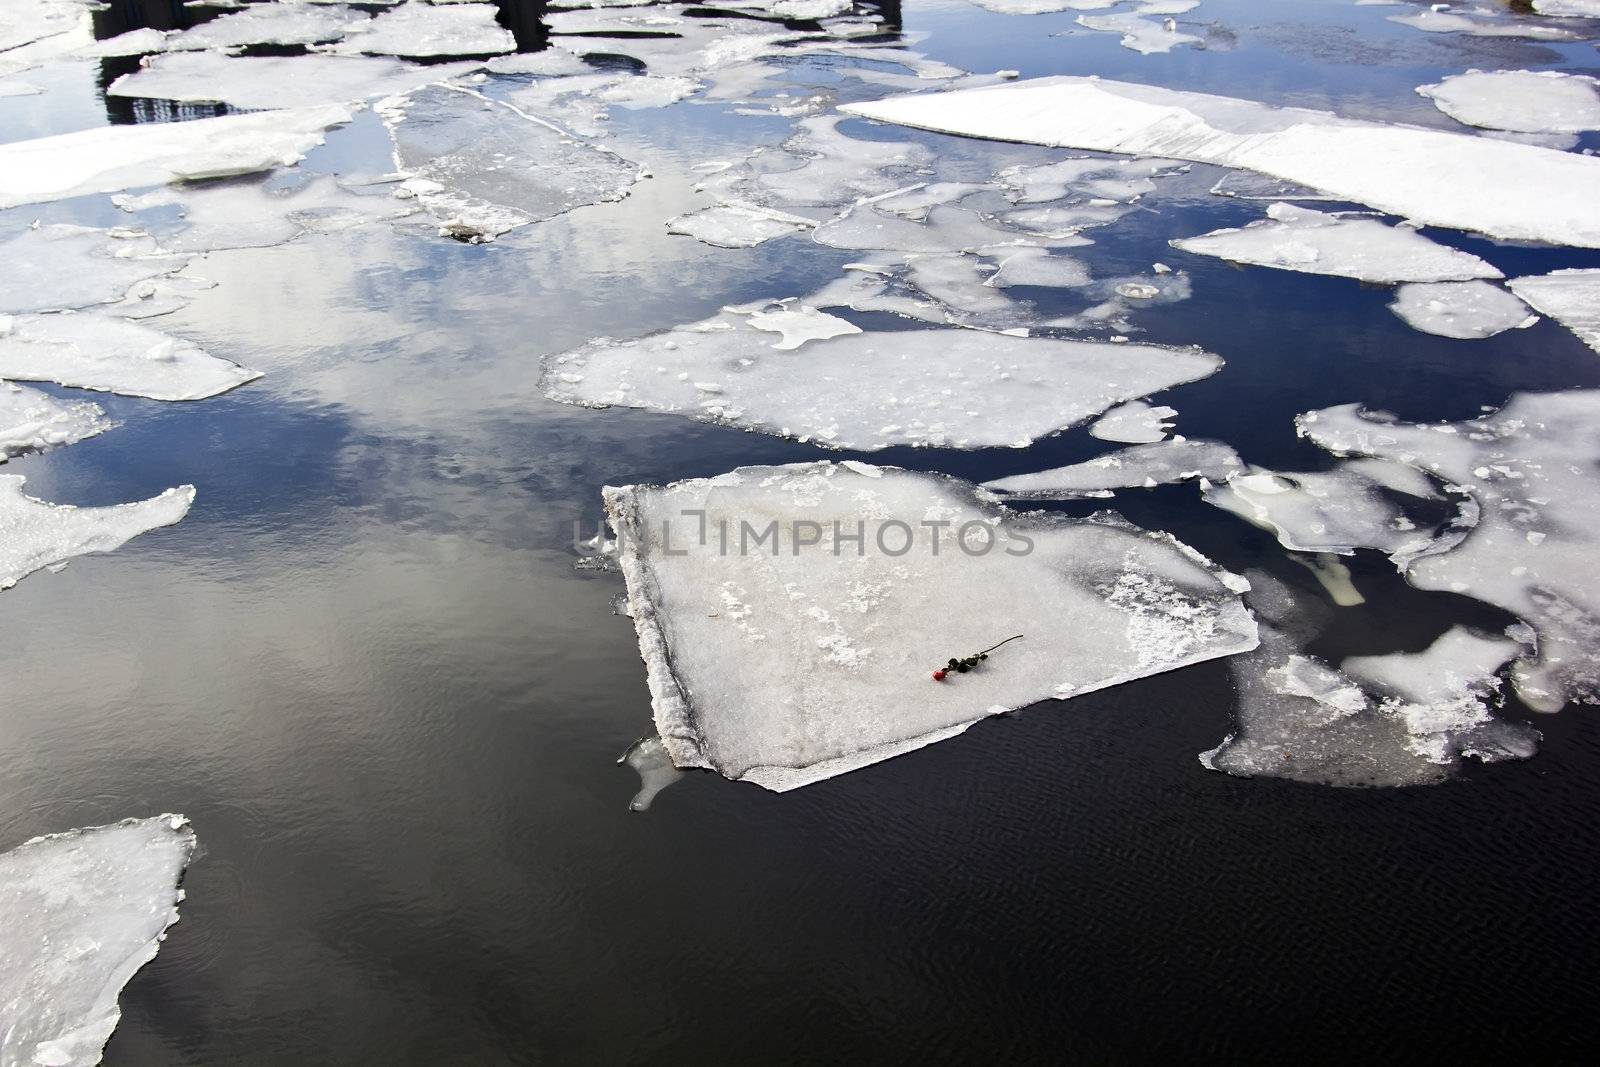 Lonely flower rose on river ice floe
